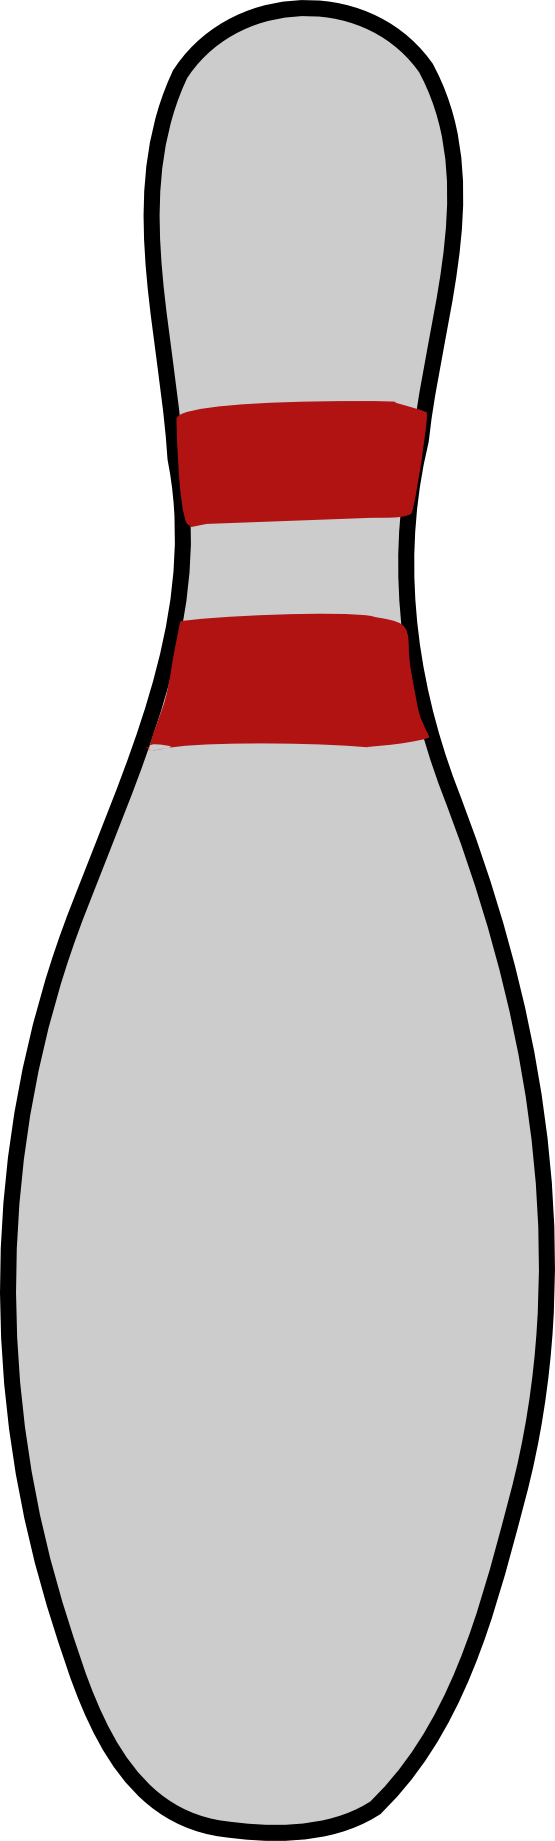 Pix For > Bowling Pin Clipart Black And White